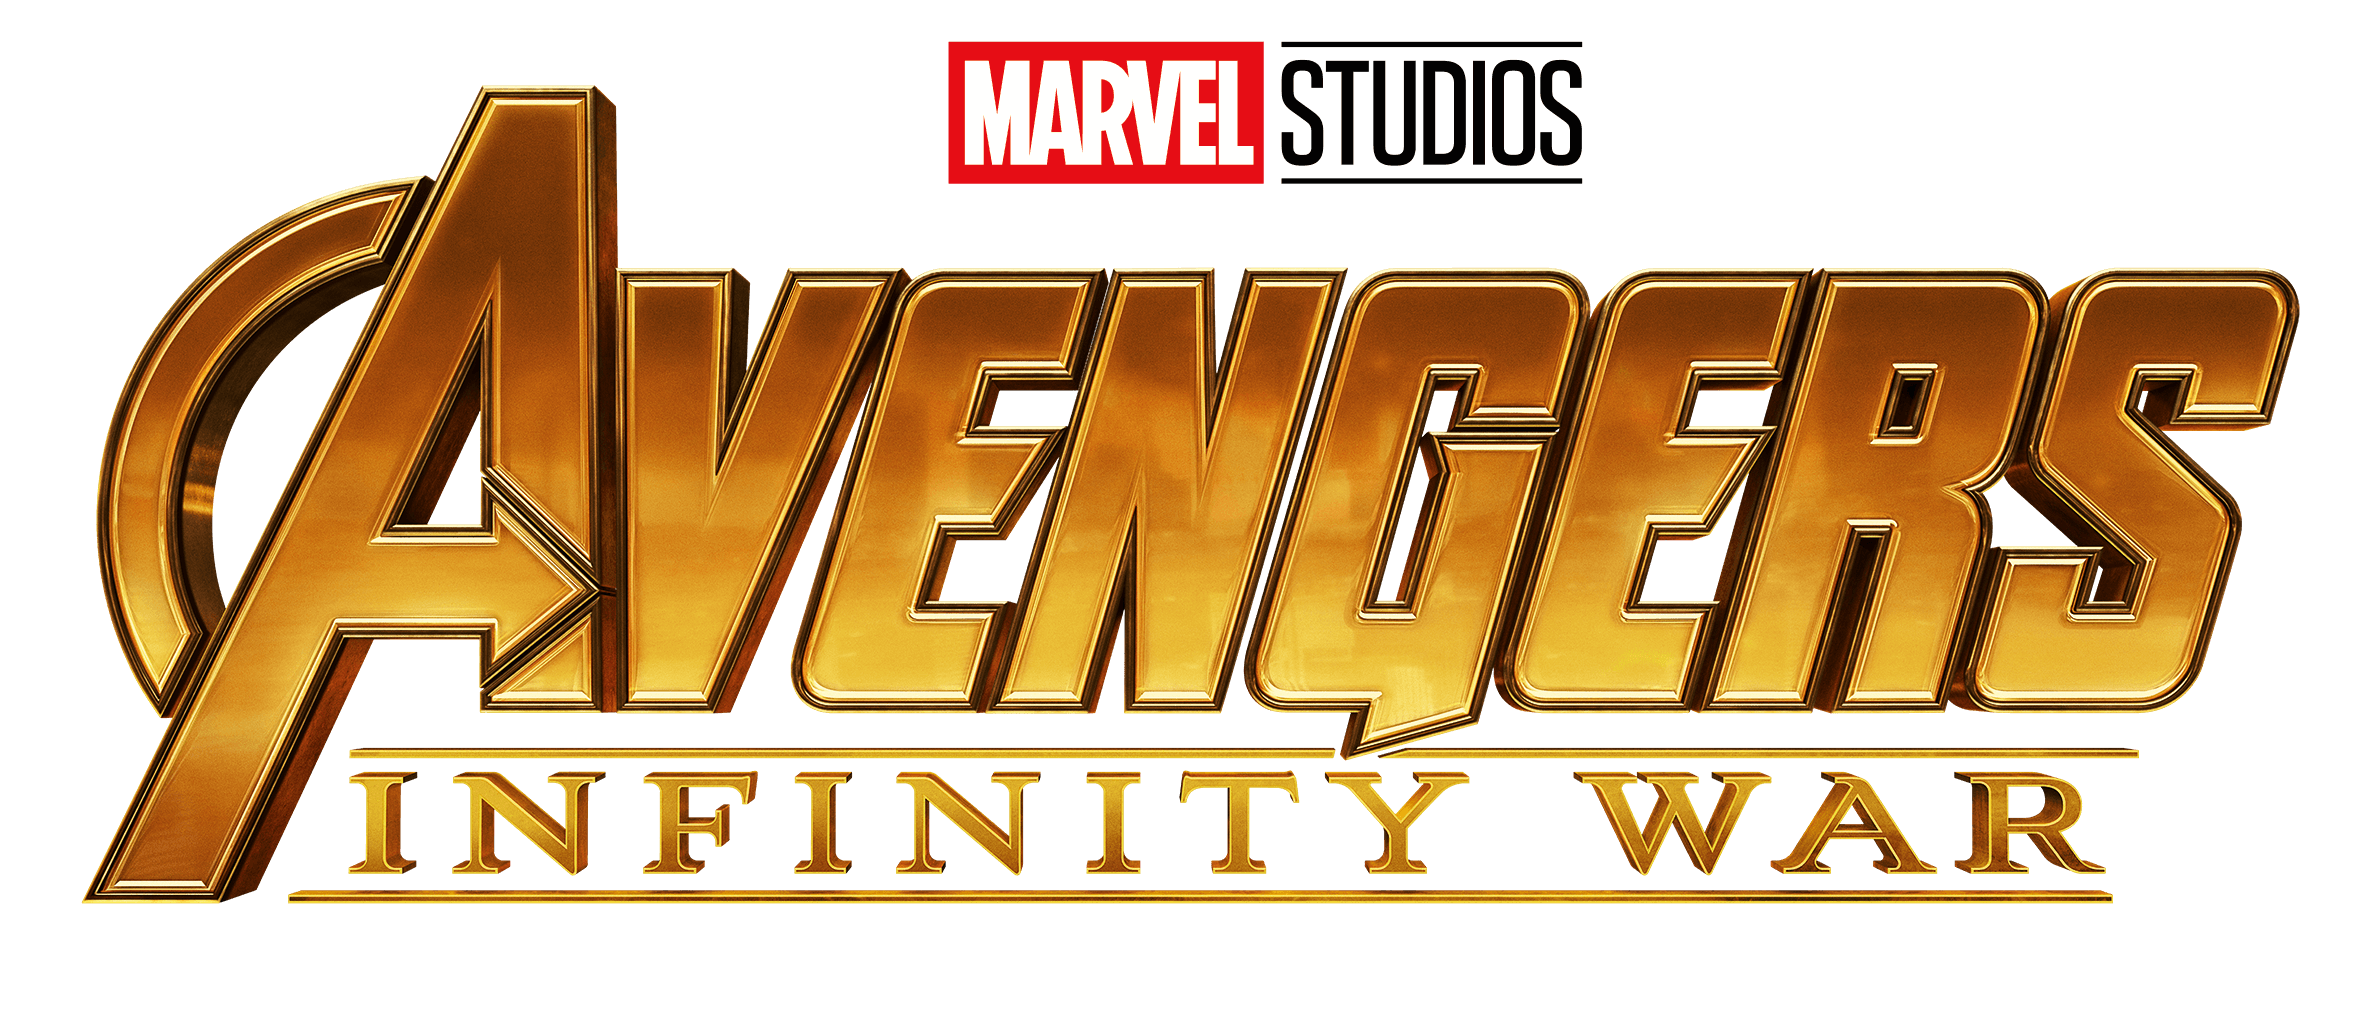 Iw Logo - Mods, change the sidebar IW logo to this, please?